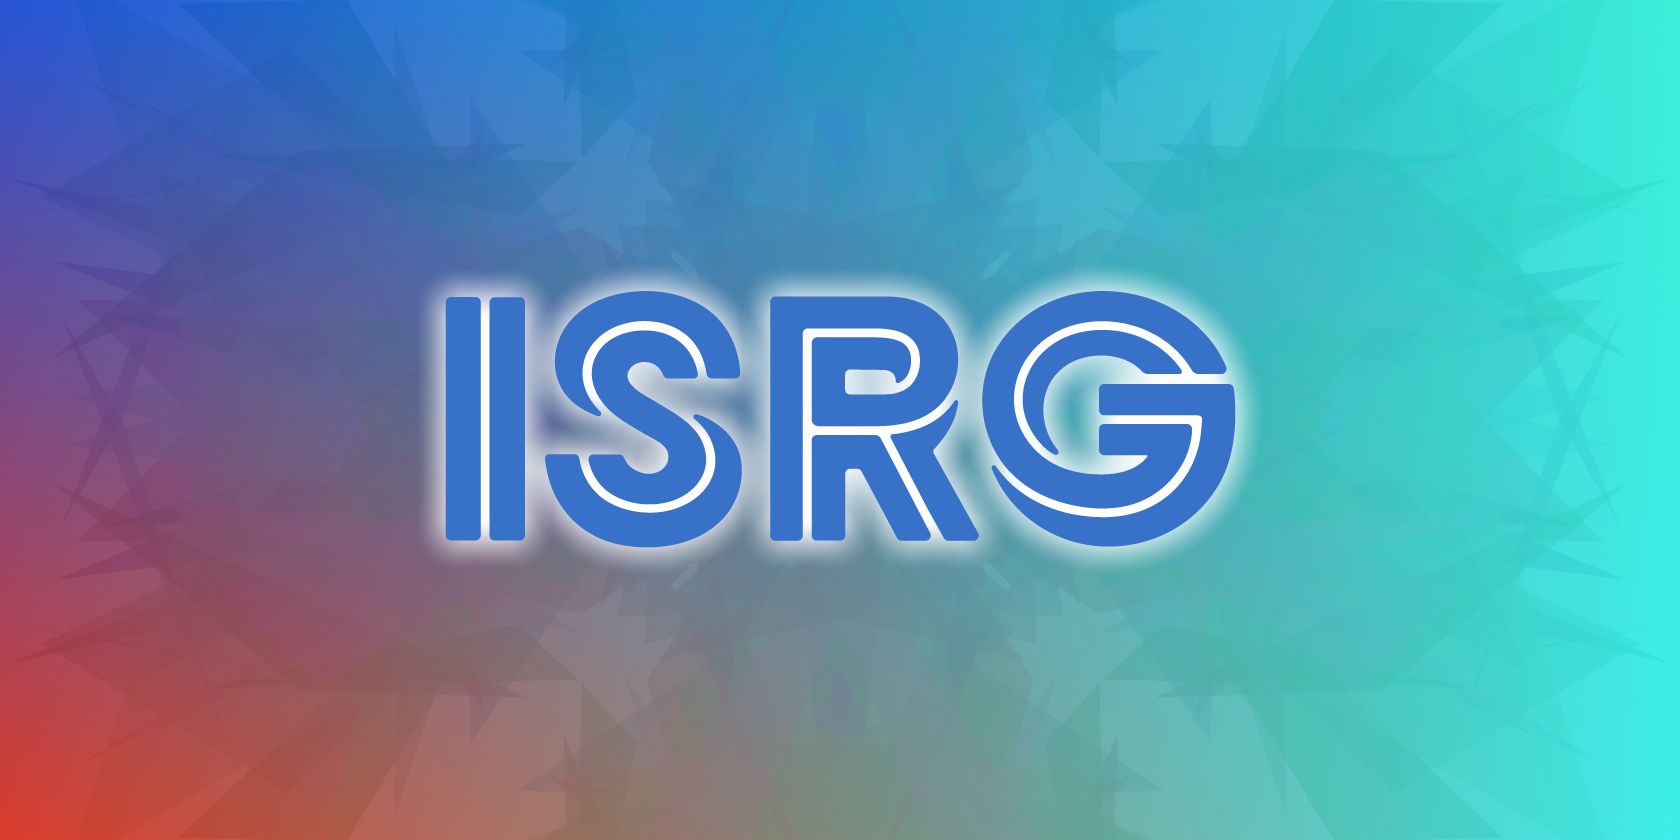 internet security research group logo feature